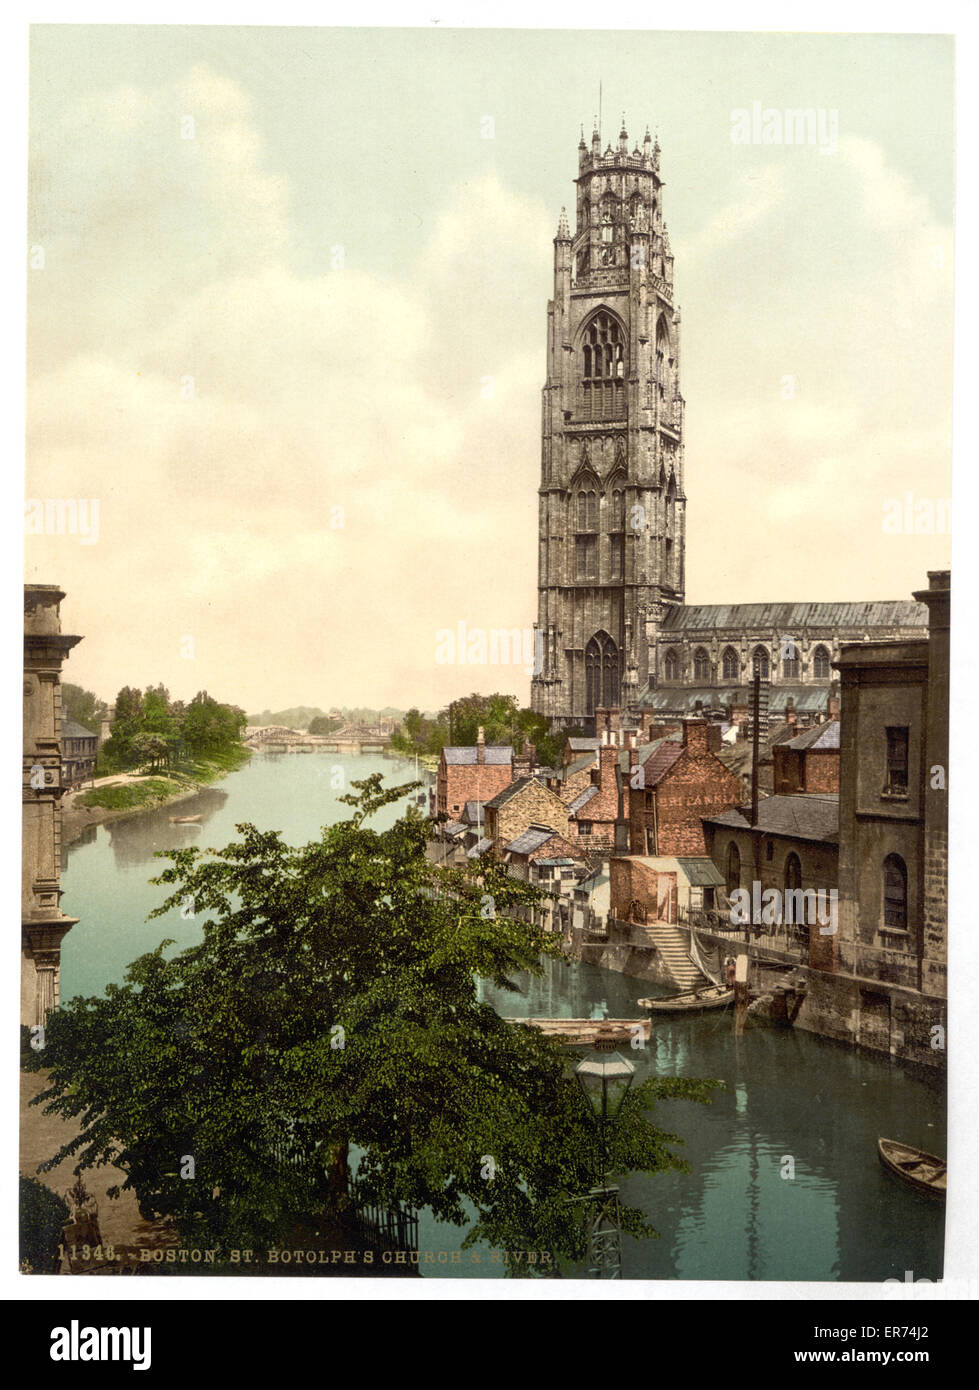 St. Botolph's Church and River, Boston, Angleterre Banque D'Images